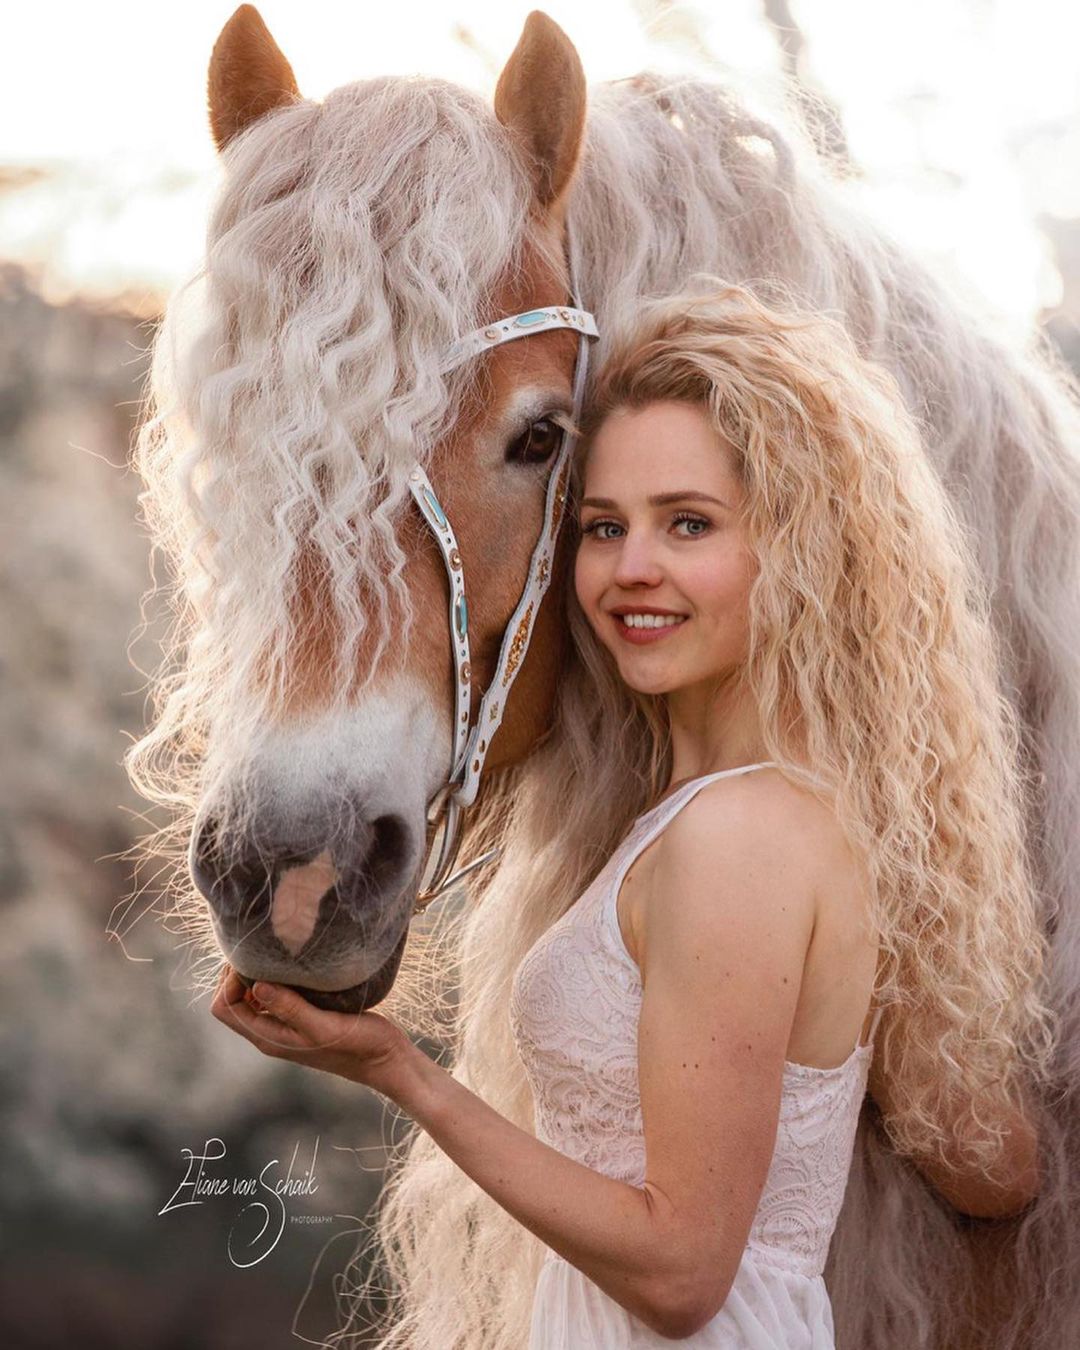 Tangled manes and folklore are two things that come to mind.